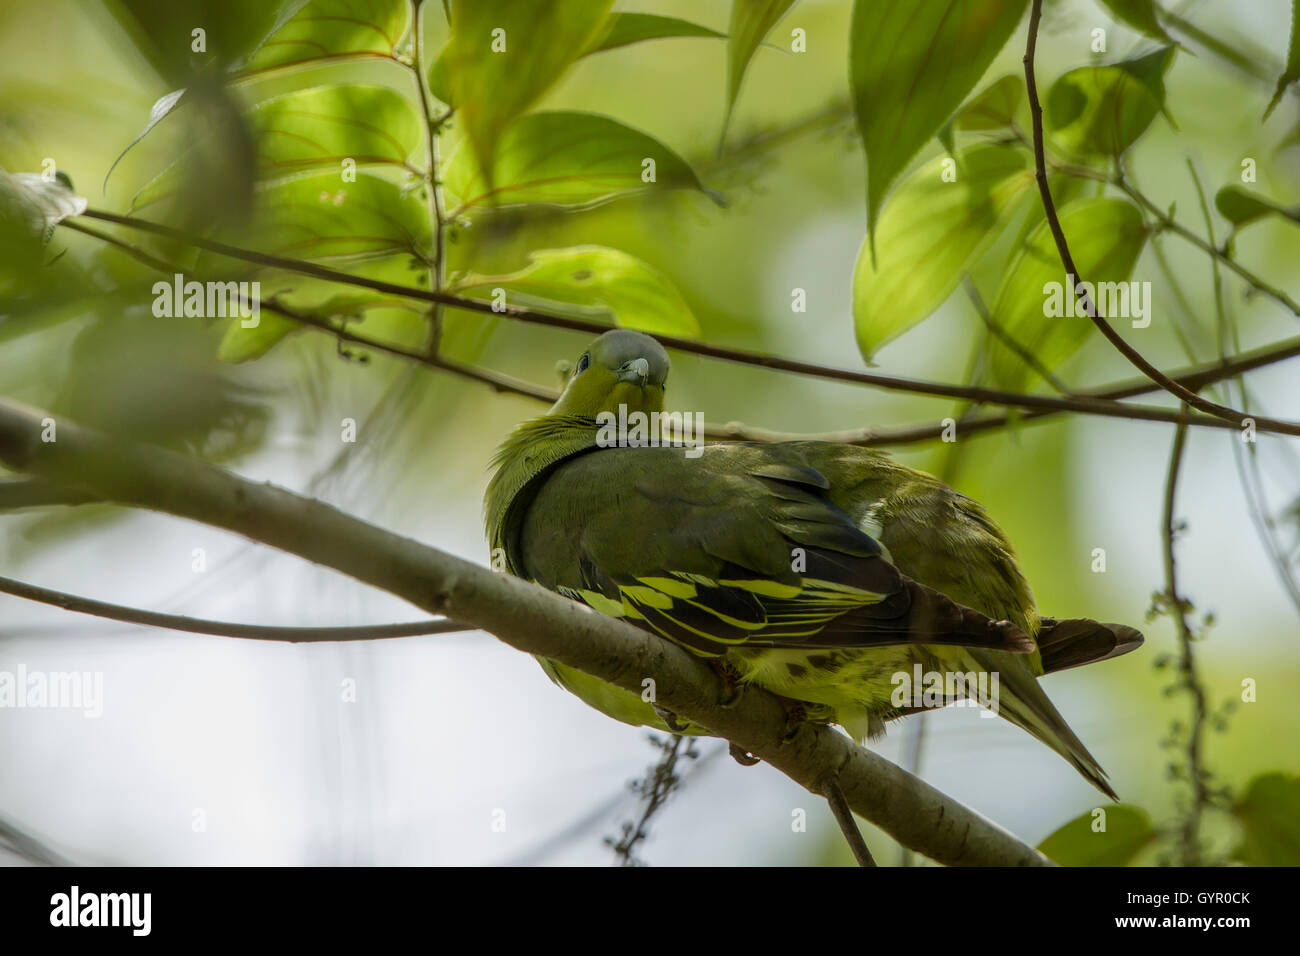 The pompadour green pigeon is a pigeon complex in the genus Treron. It is widespread in forests of southern and southeast Asia. Stock Photo